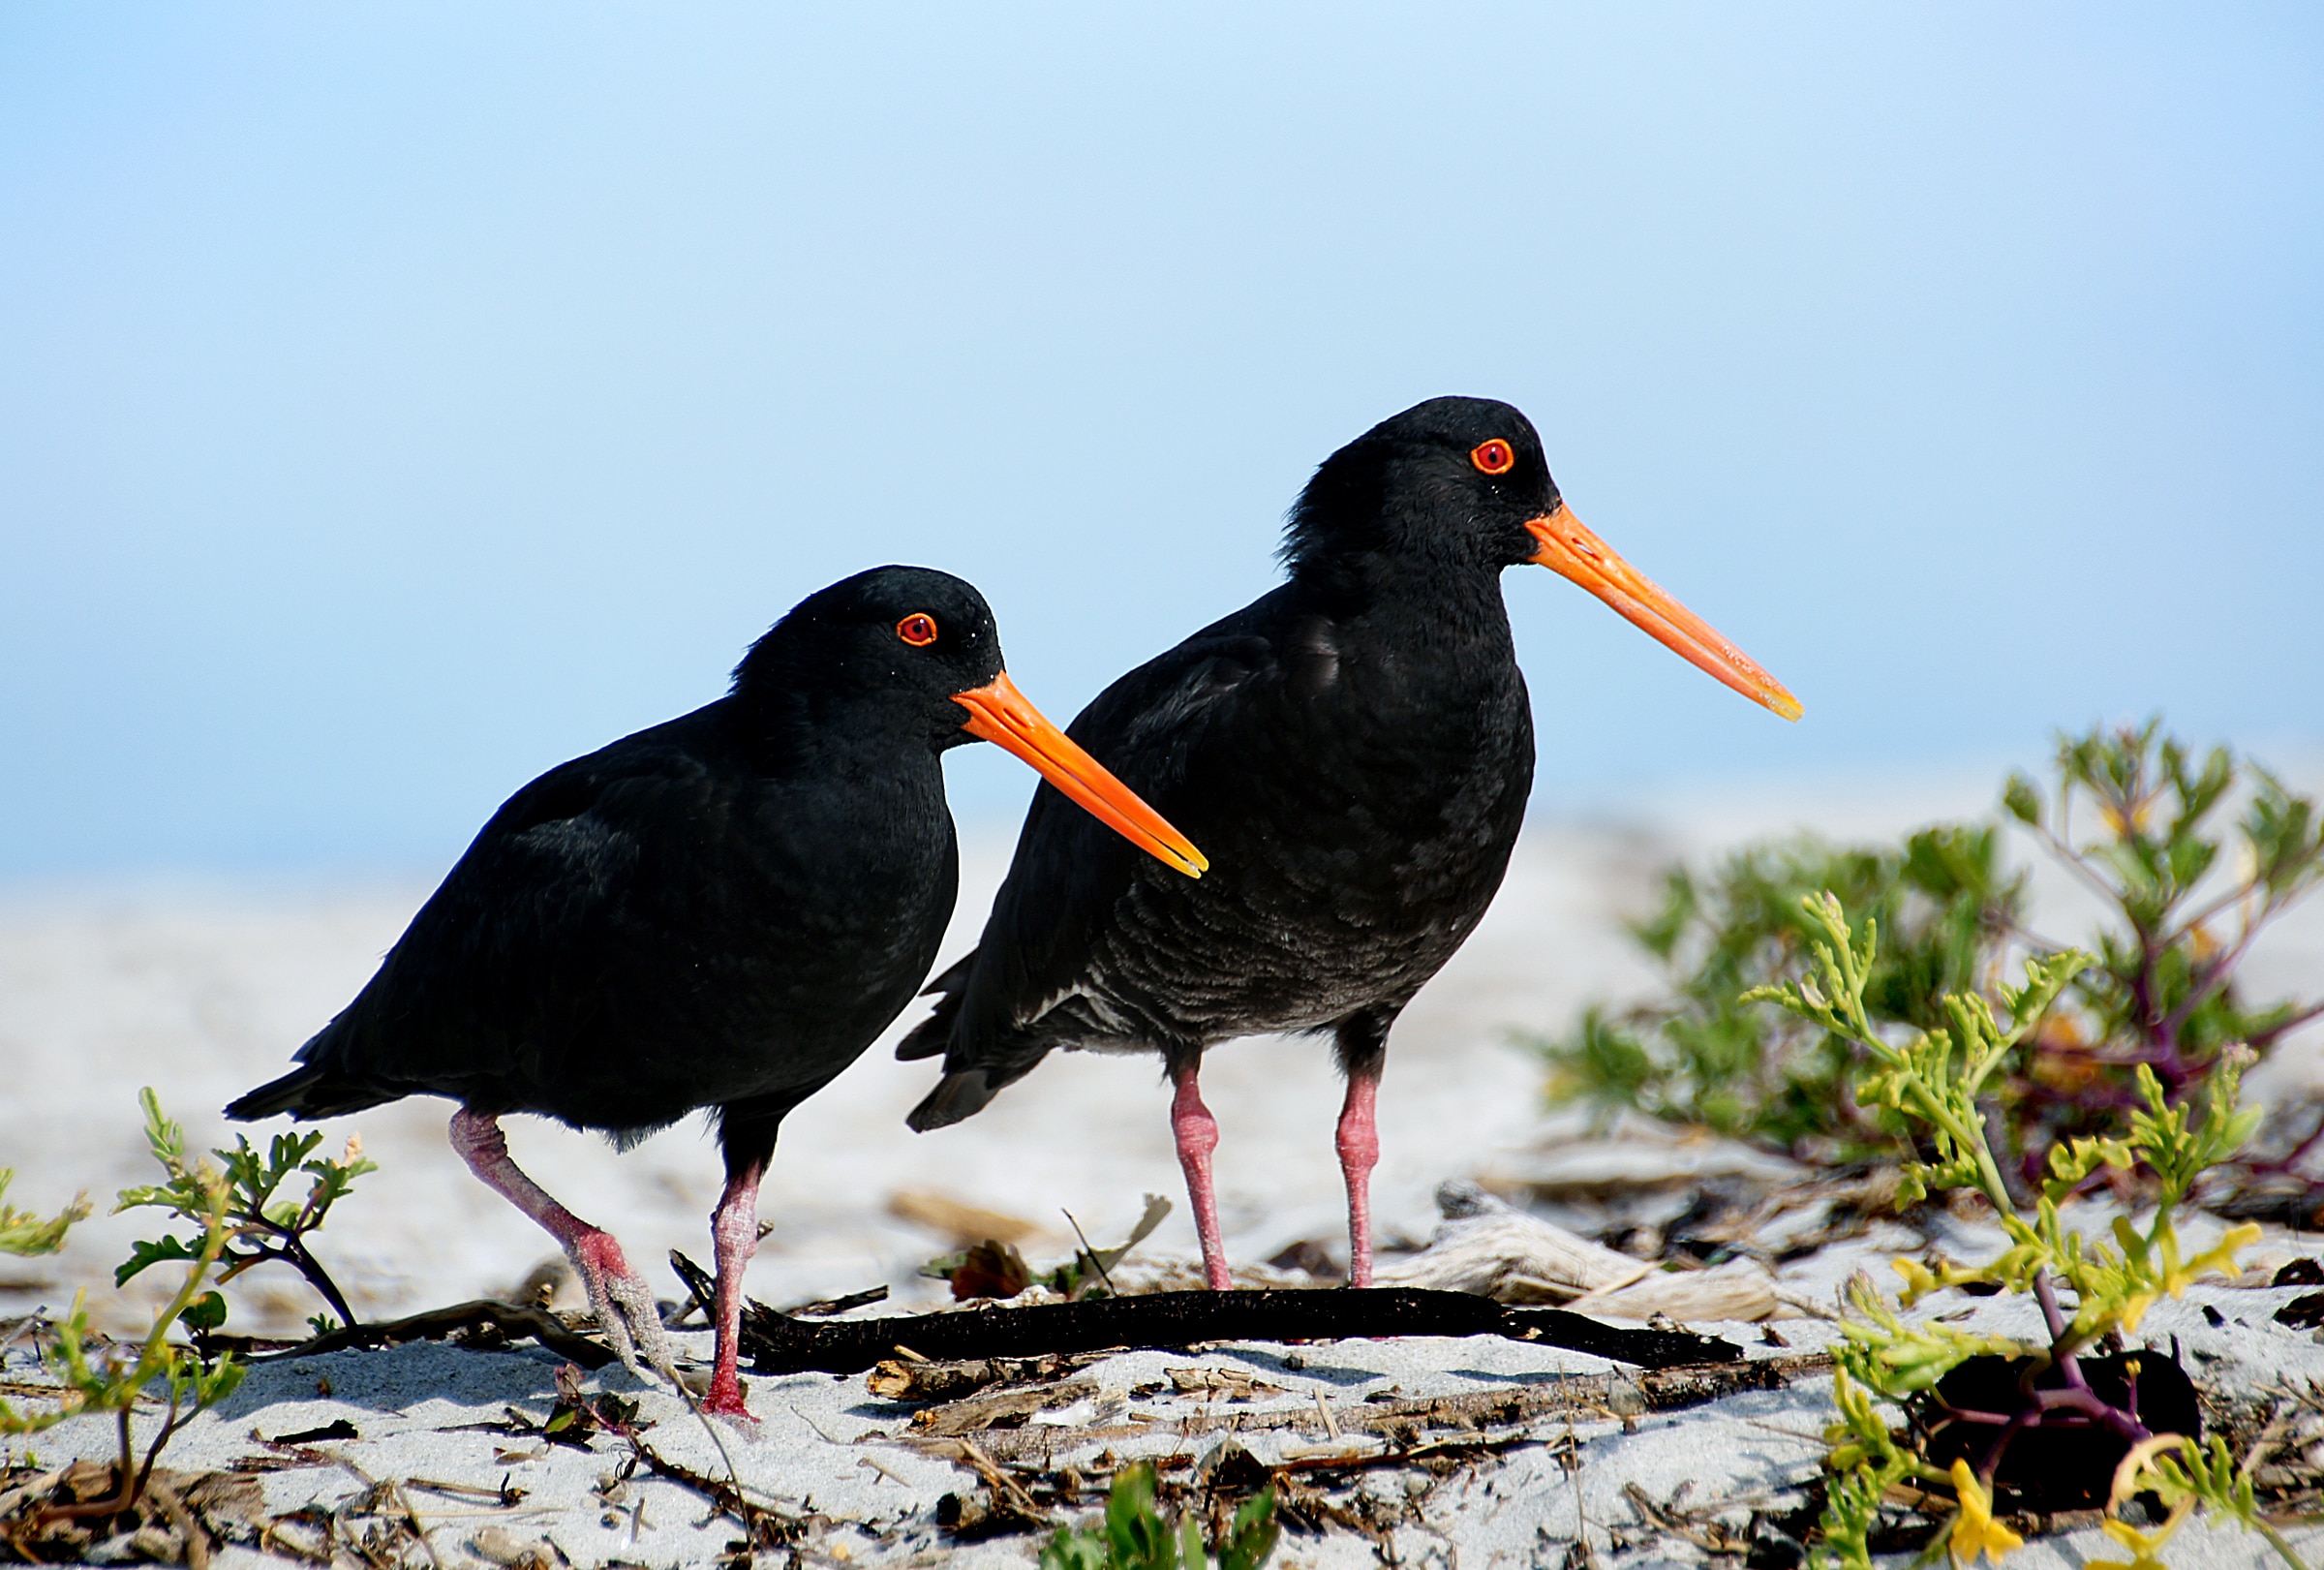 A pair of Variable oystercatchers